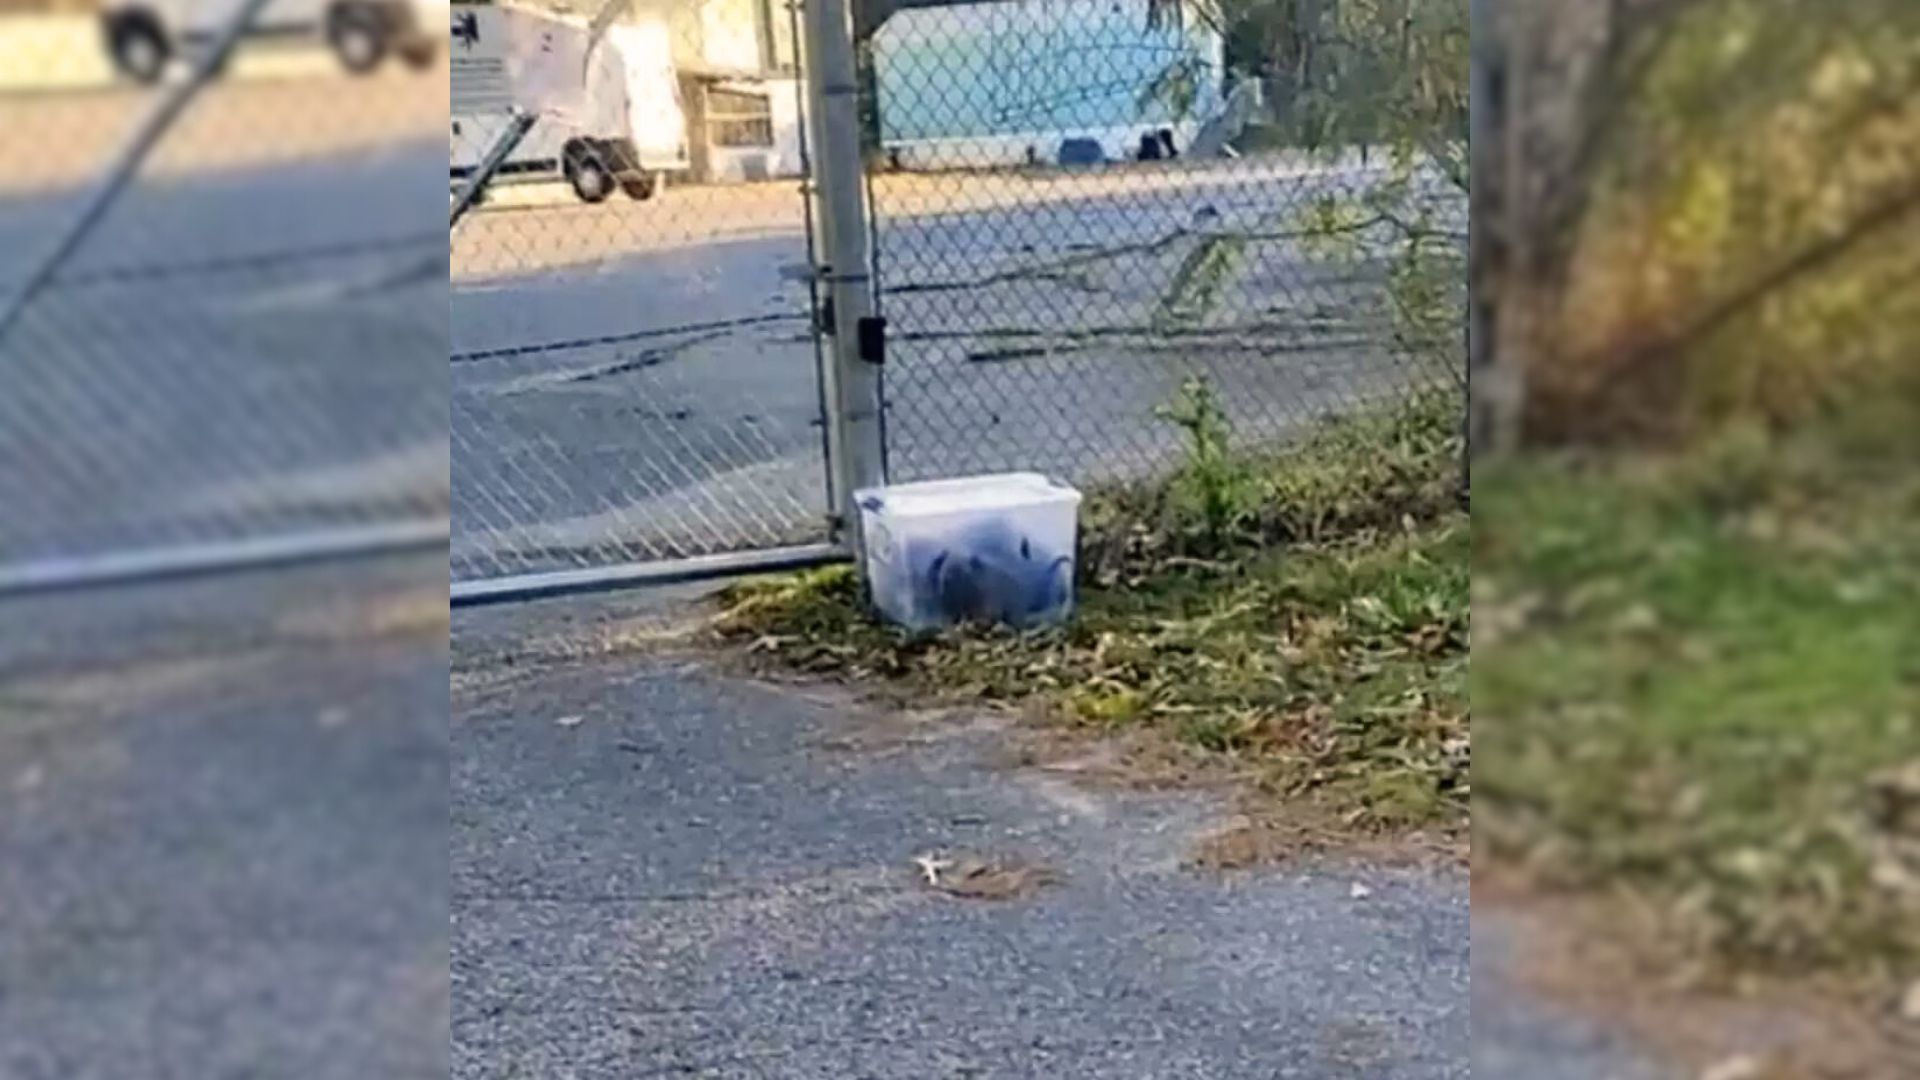 Woman Realized There Was A Plastic Container On Her Front Lawn So She Decided To Investigate